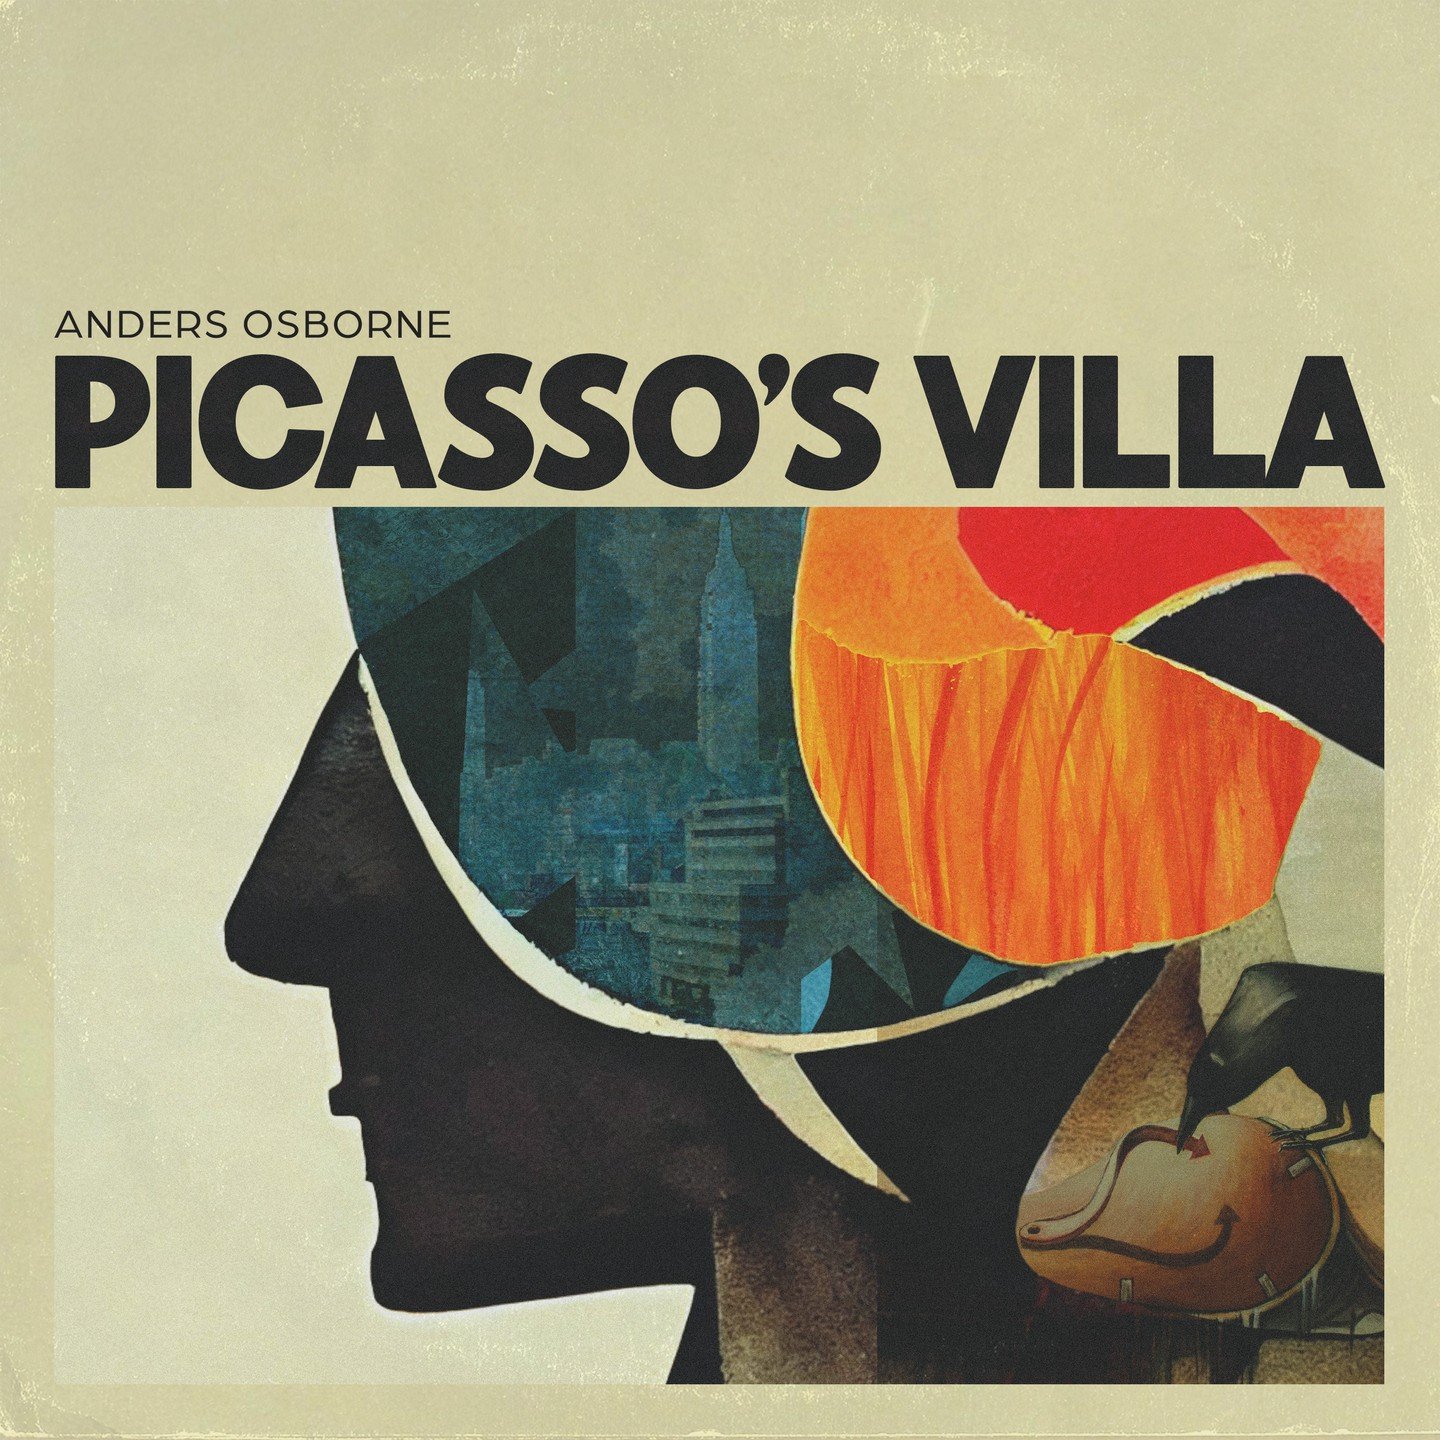 Excited to announce @andersosborne new album &quot;Picasso's Villa&quot; is out on all streaming platforms! 

Go check it out at the link in bio.